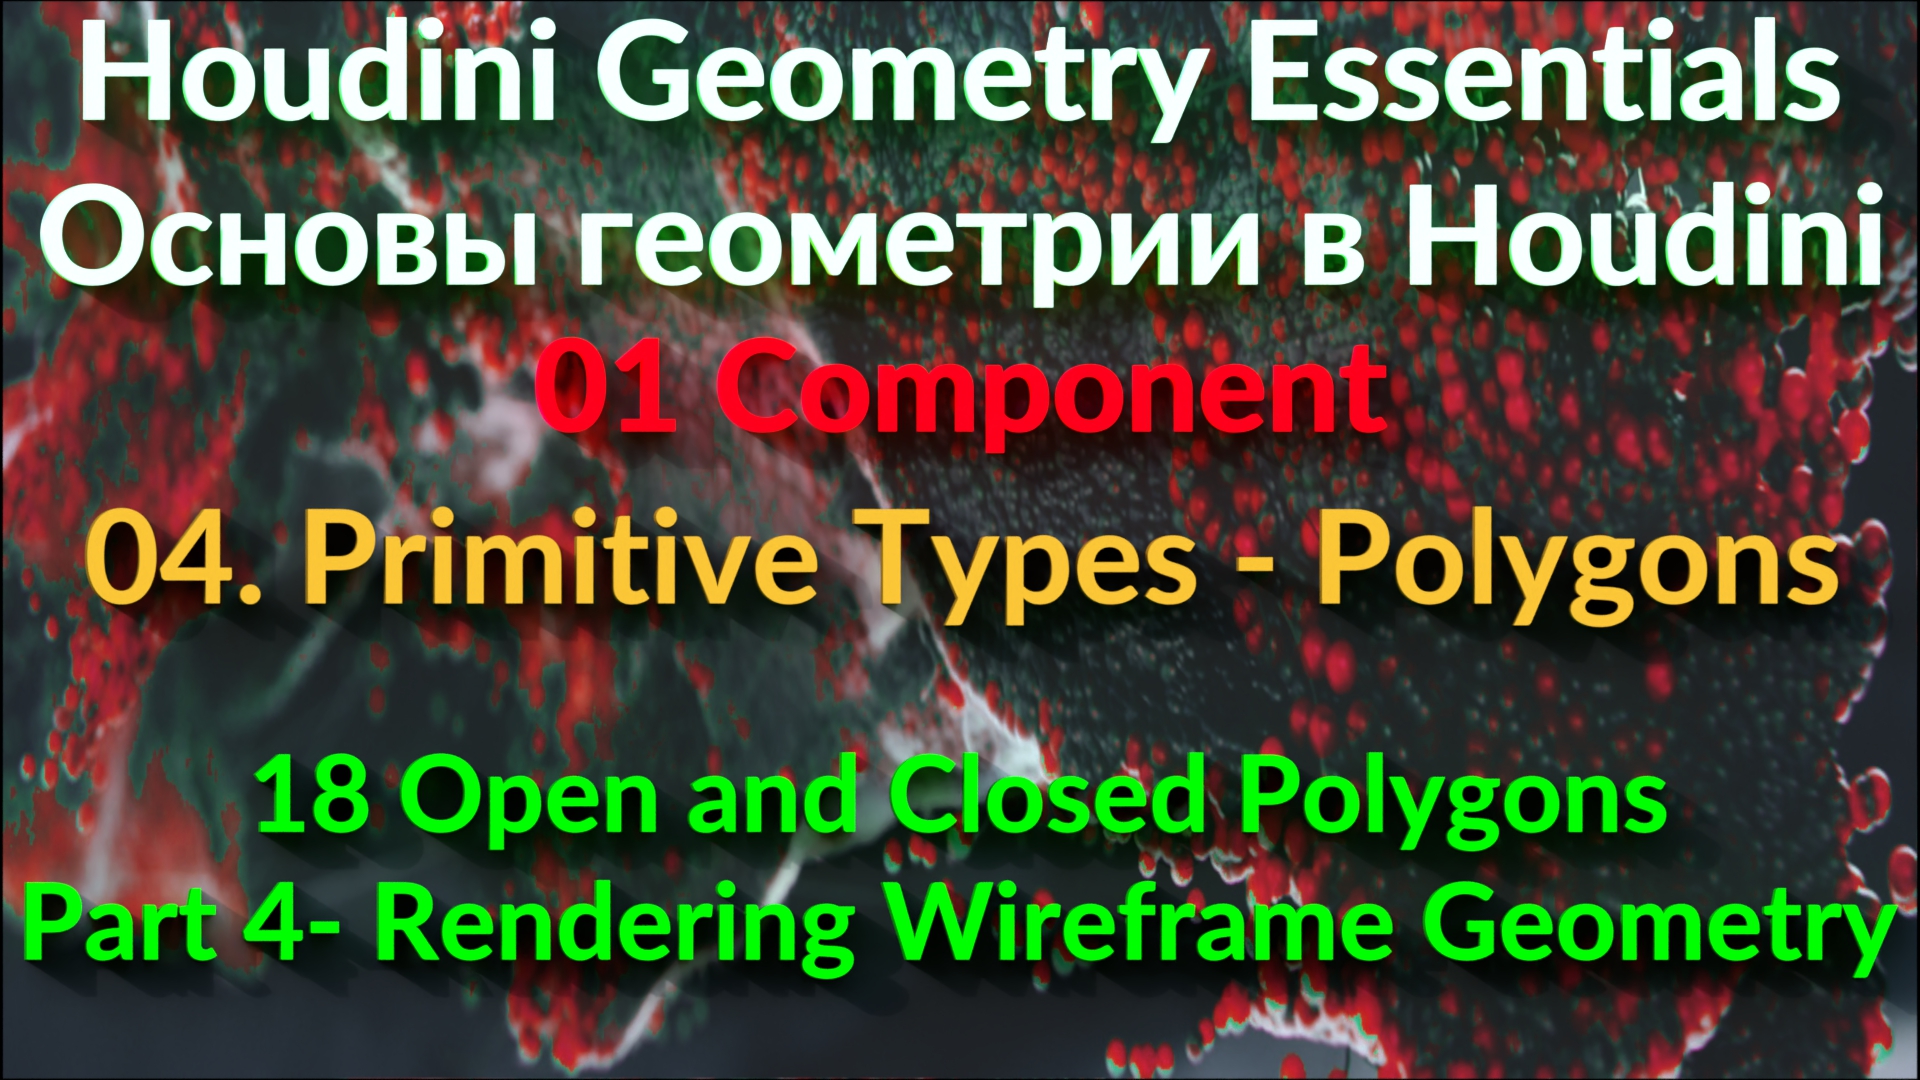 01_04_18. Open and Closed Polygons - Part 4 - Rendering Wireframe Geometry